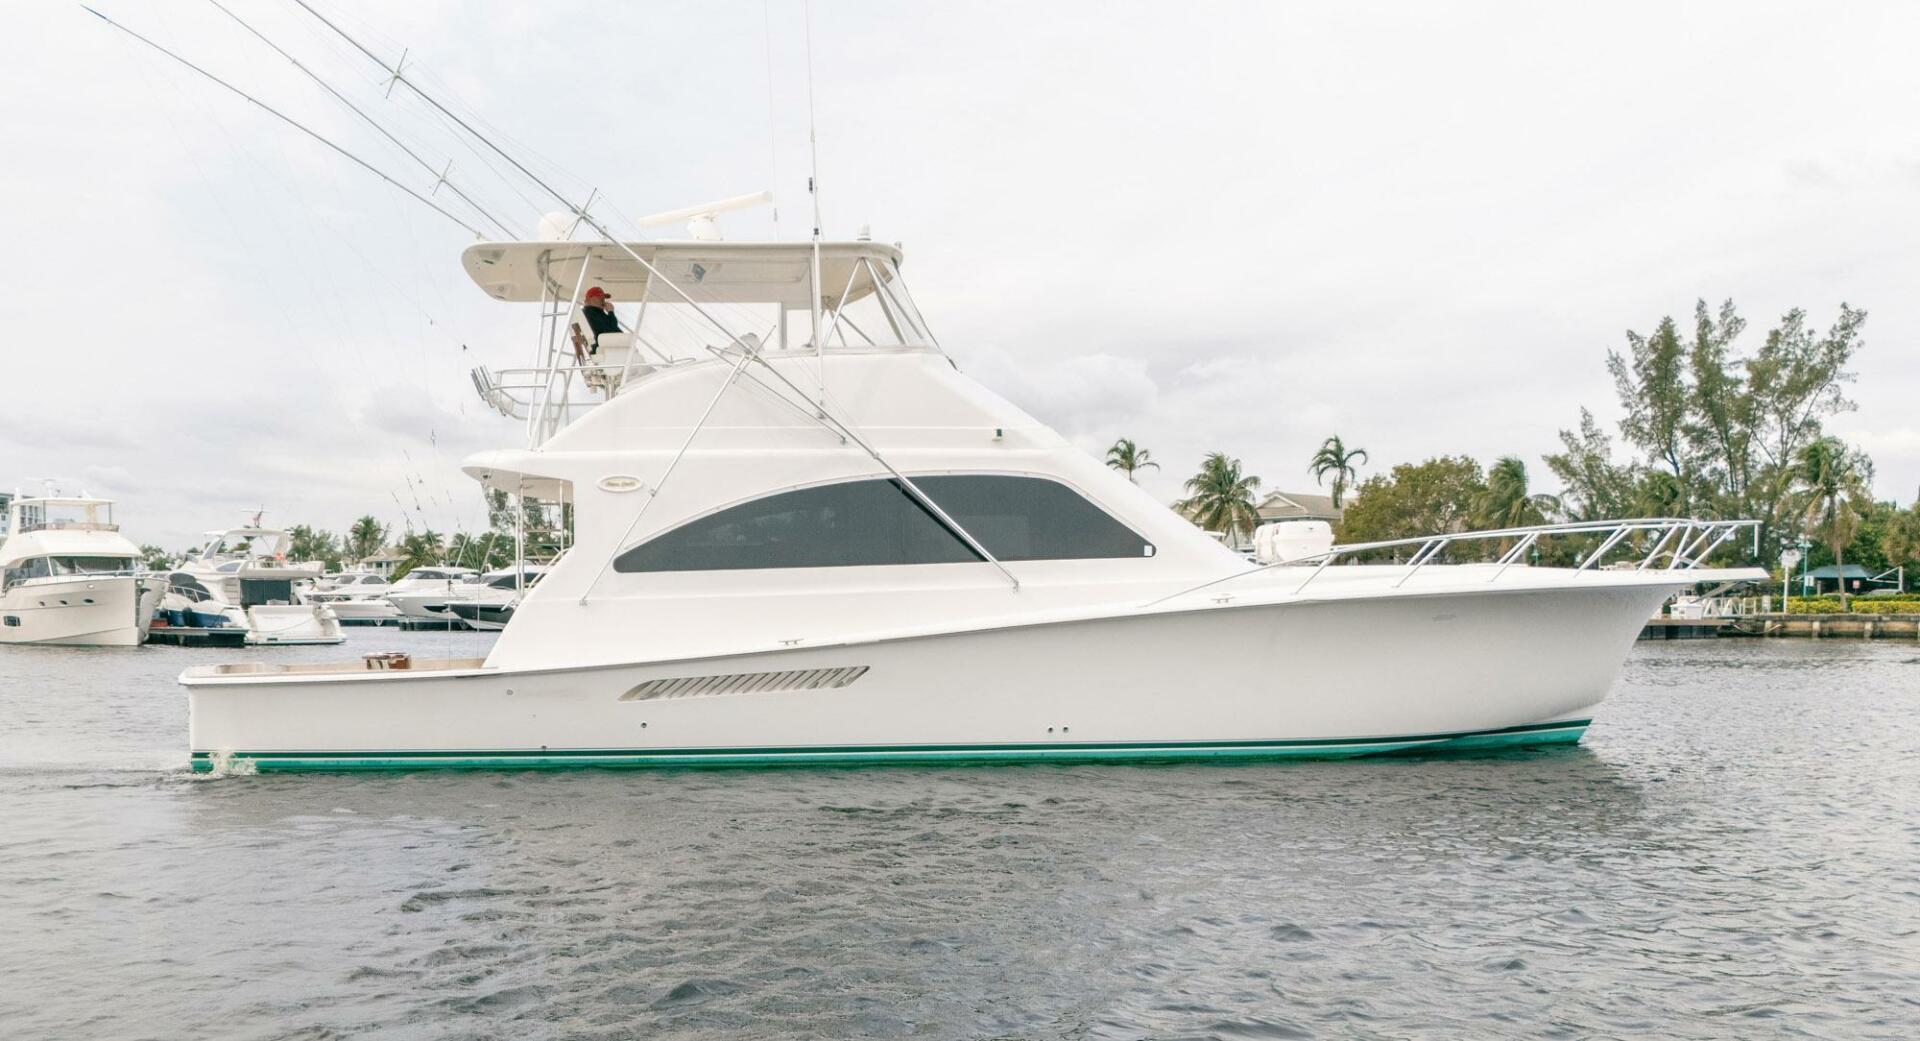 WAVE PAVER Yacht for Sale in Fort Lauderdale | 54' (16.46m) 2007 